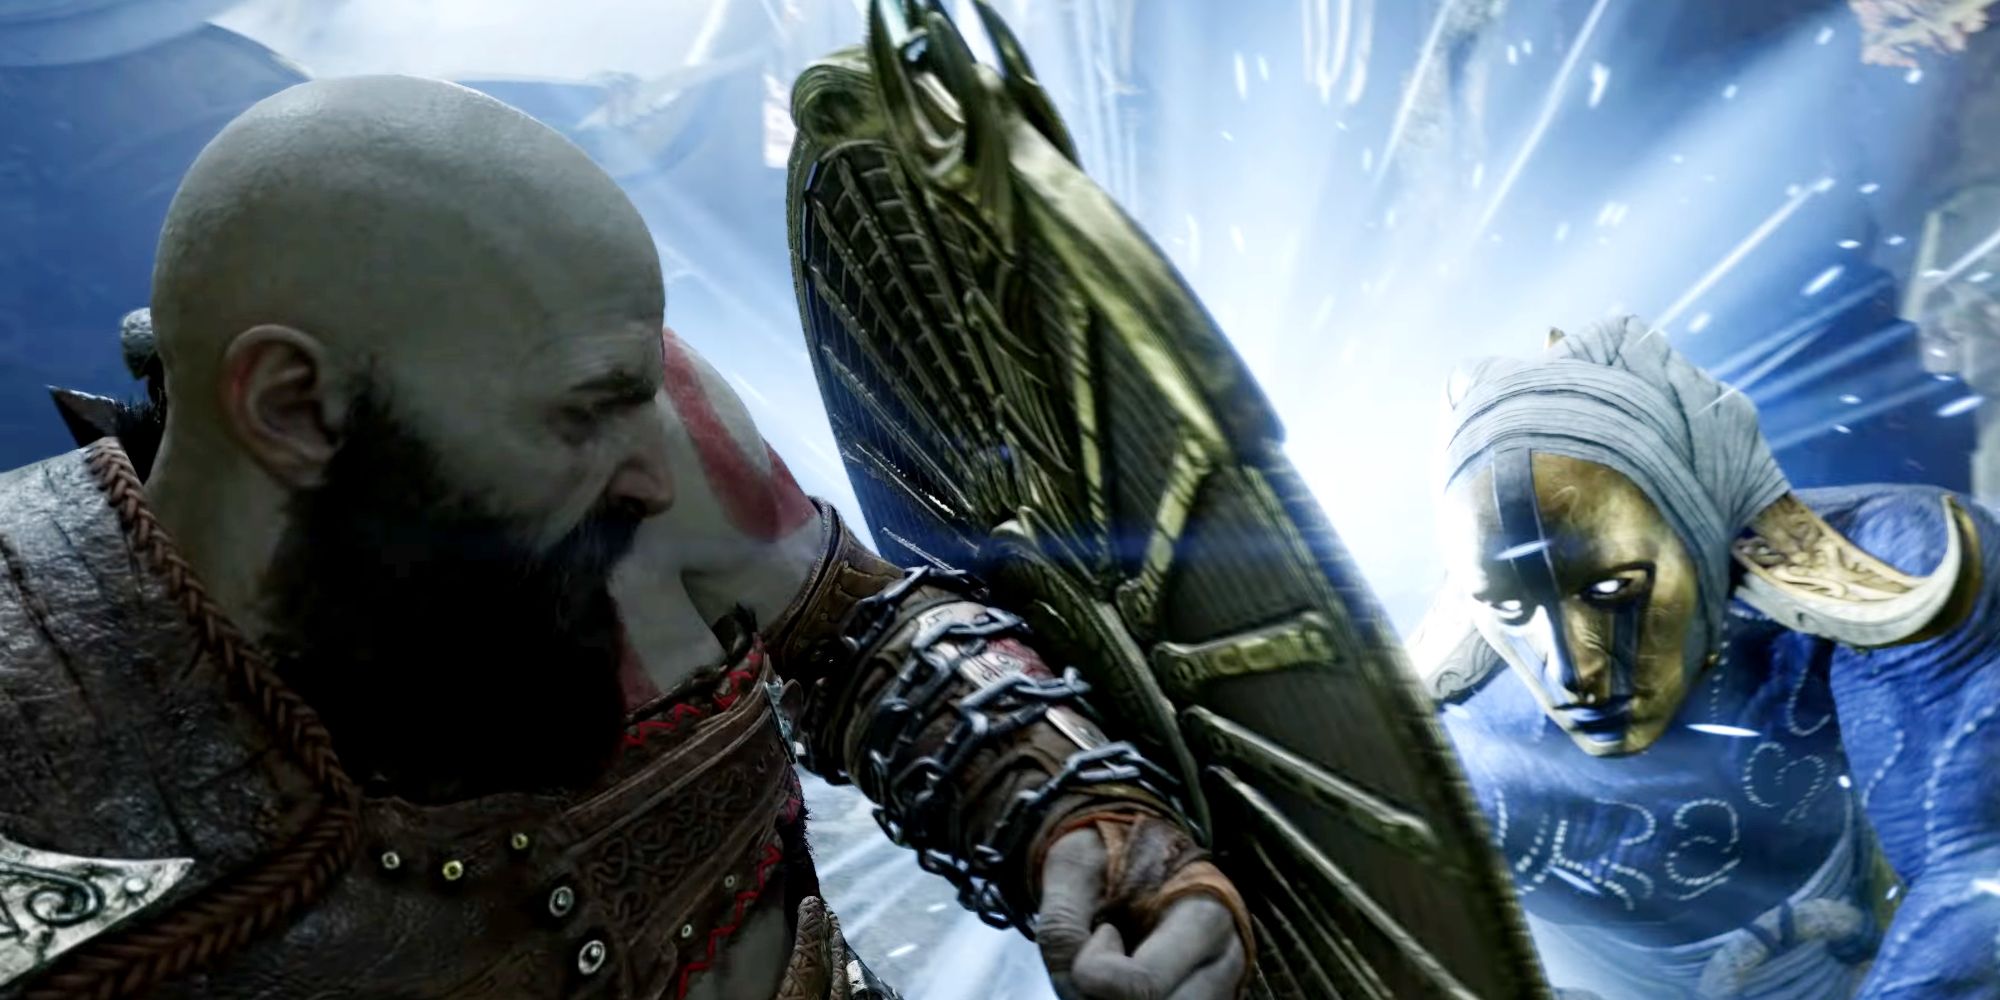 Will God of War Ragnarök be able to live up to the hype after months of silence in marketing?